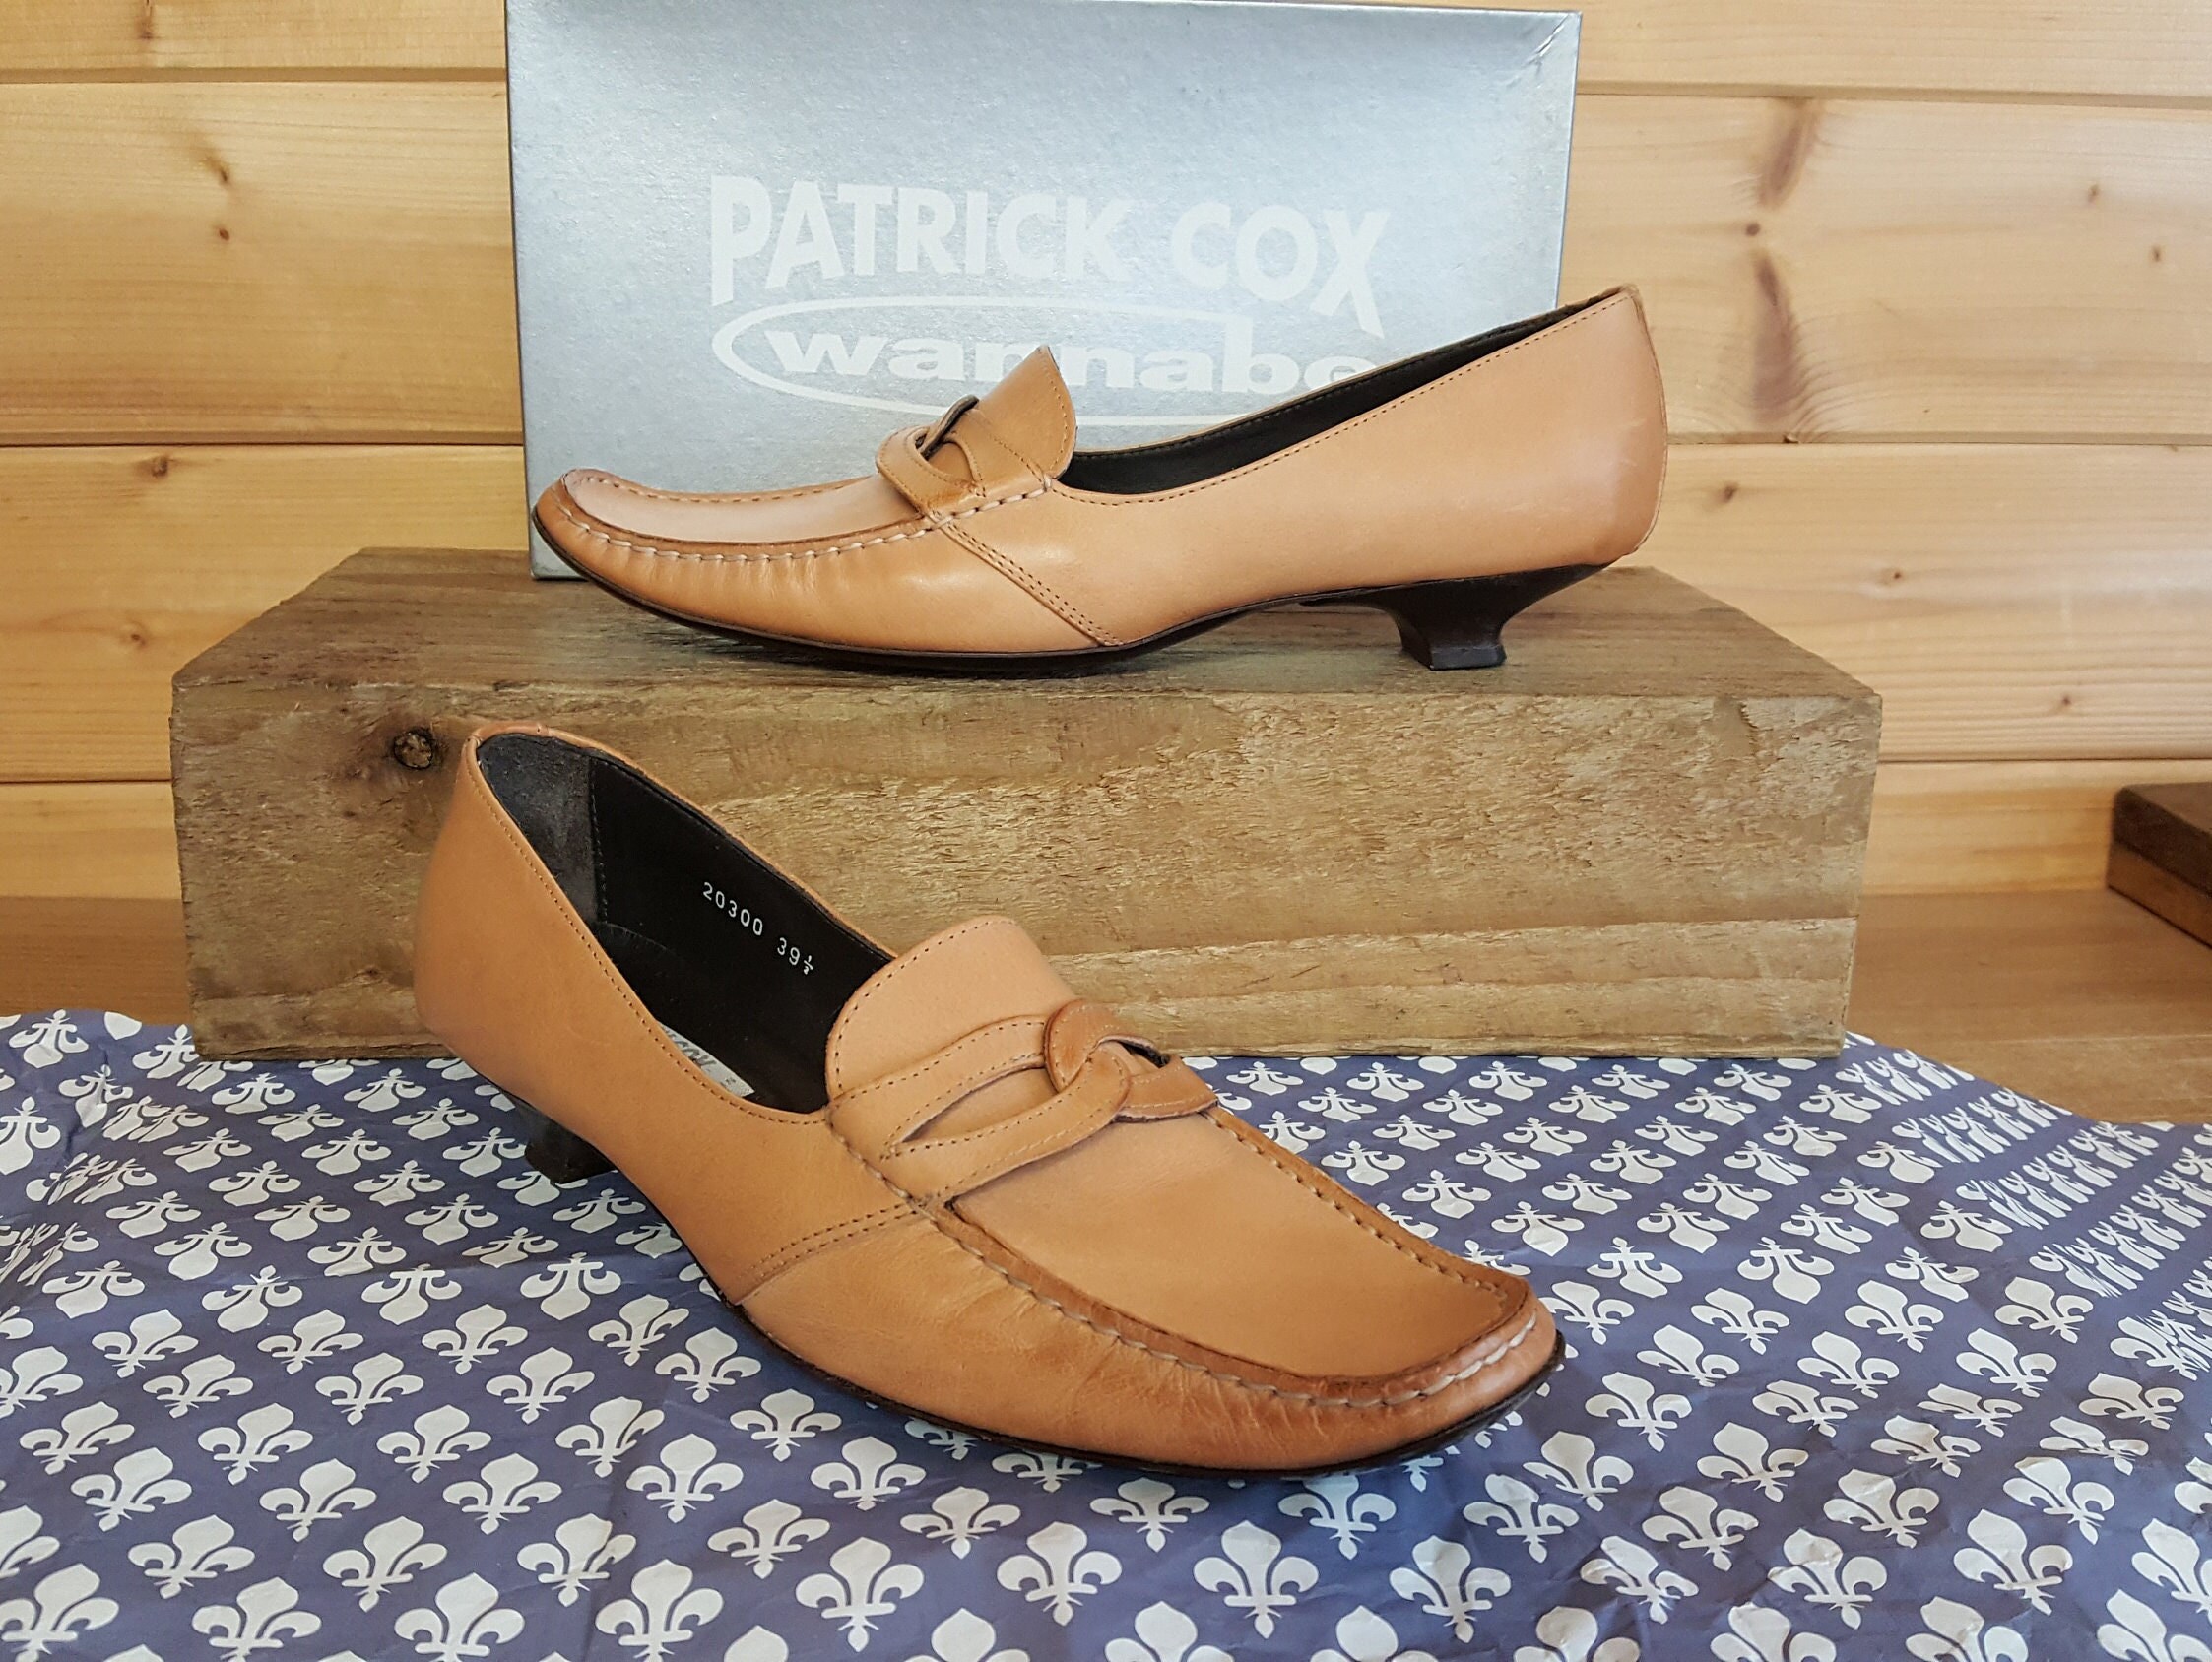 PATRICK COX WANNABEE beautiful khaki green leather sliders,uk 3,excellent condition Shoes Womens Shoes Sandals Slingbacks & Slides 